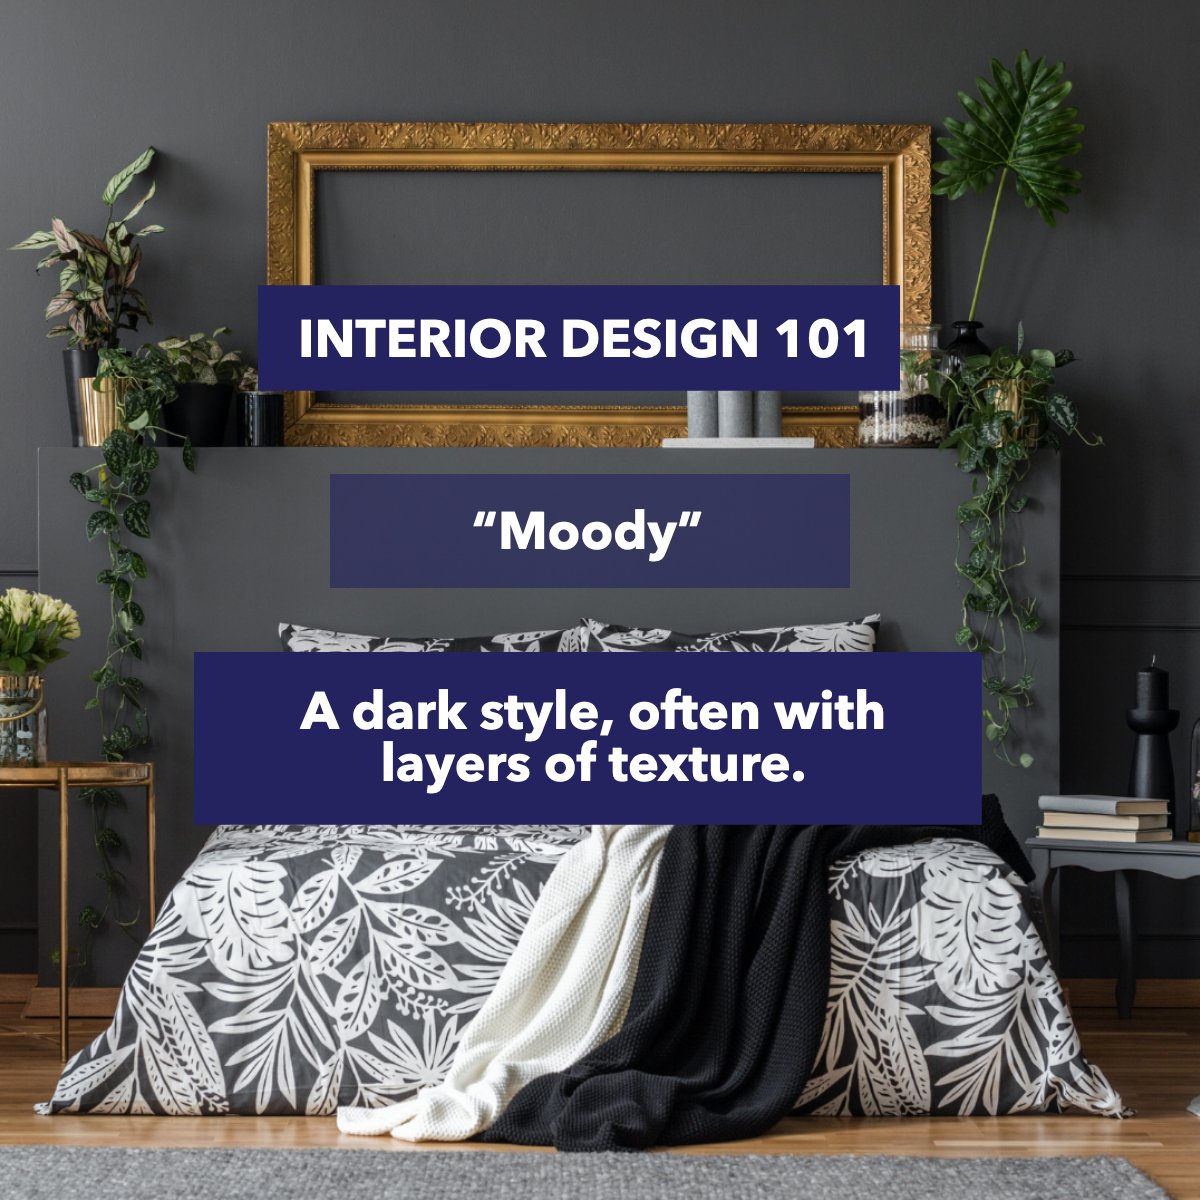 Moody is not only a mood is a style in interior design. 

Are you feeling moody? 

#interiorsdesign #interiortrends #interiordesigning #interiordesigntrends #interiorsaddict #interiordesigntips #interiordesigngoals